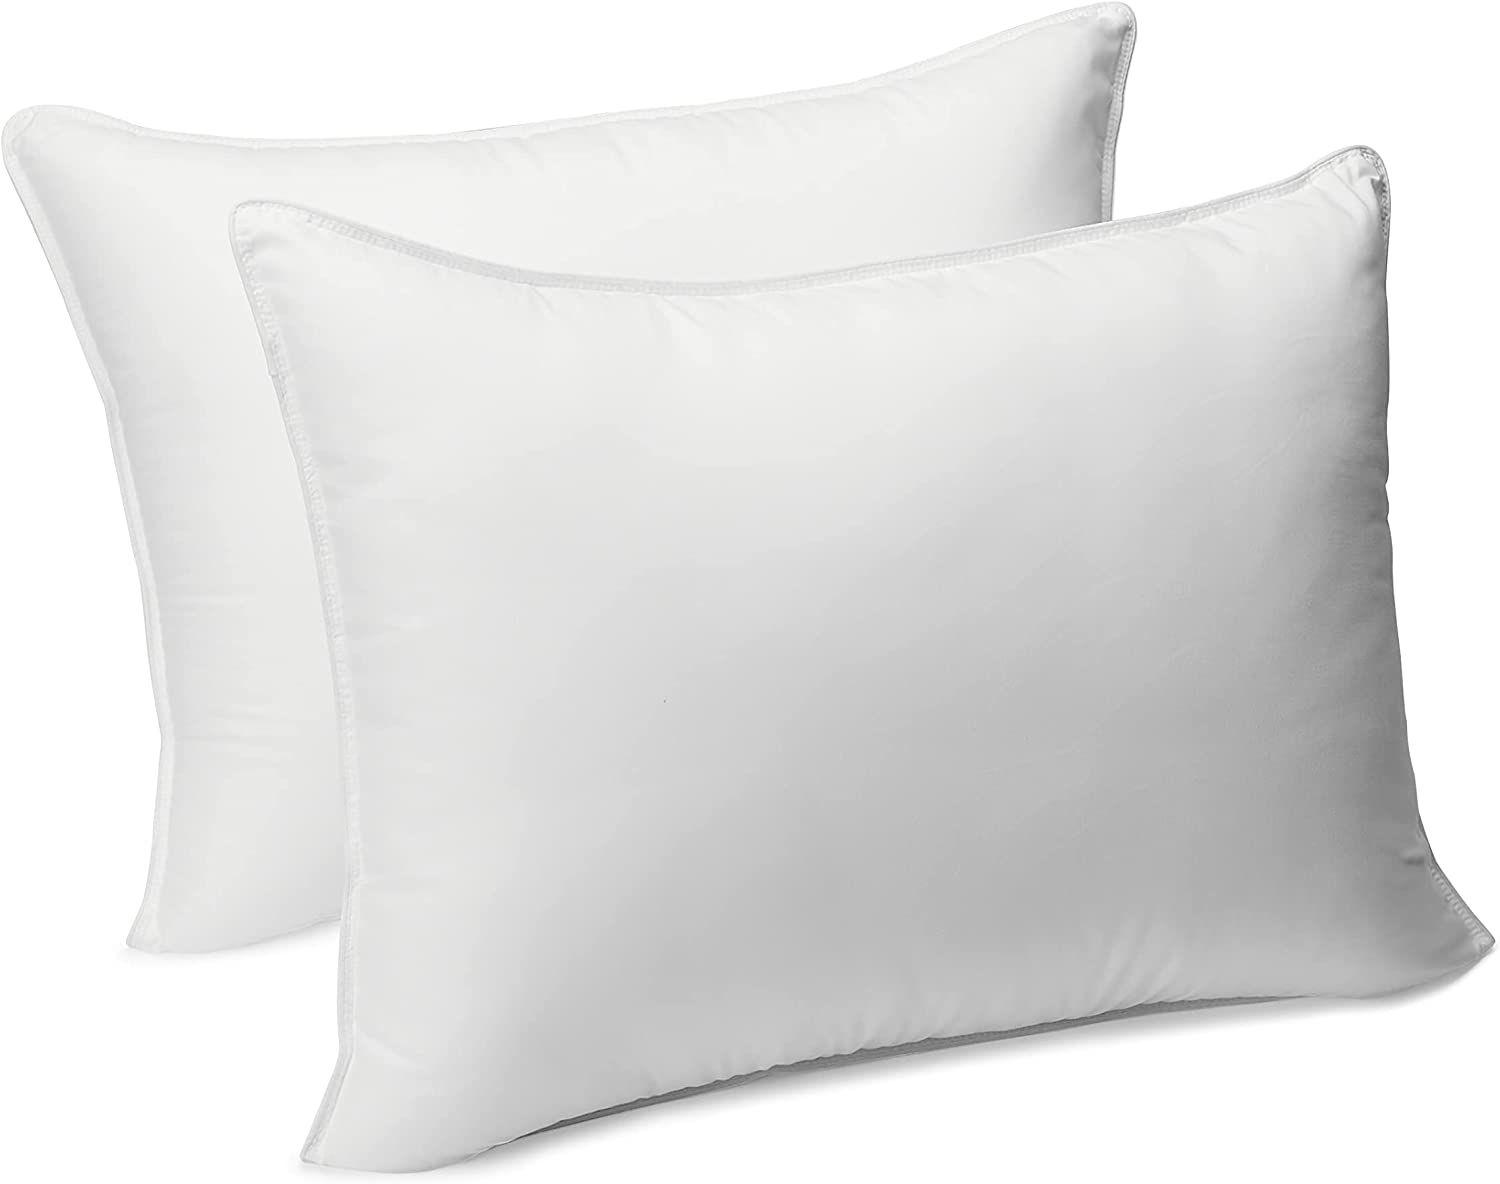 college student dorm room supplies: pillows